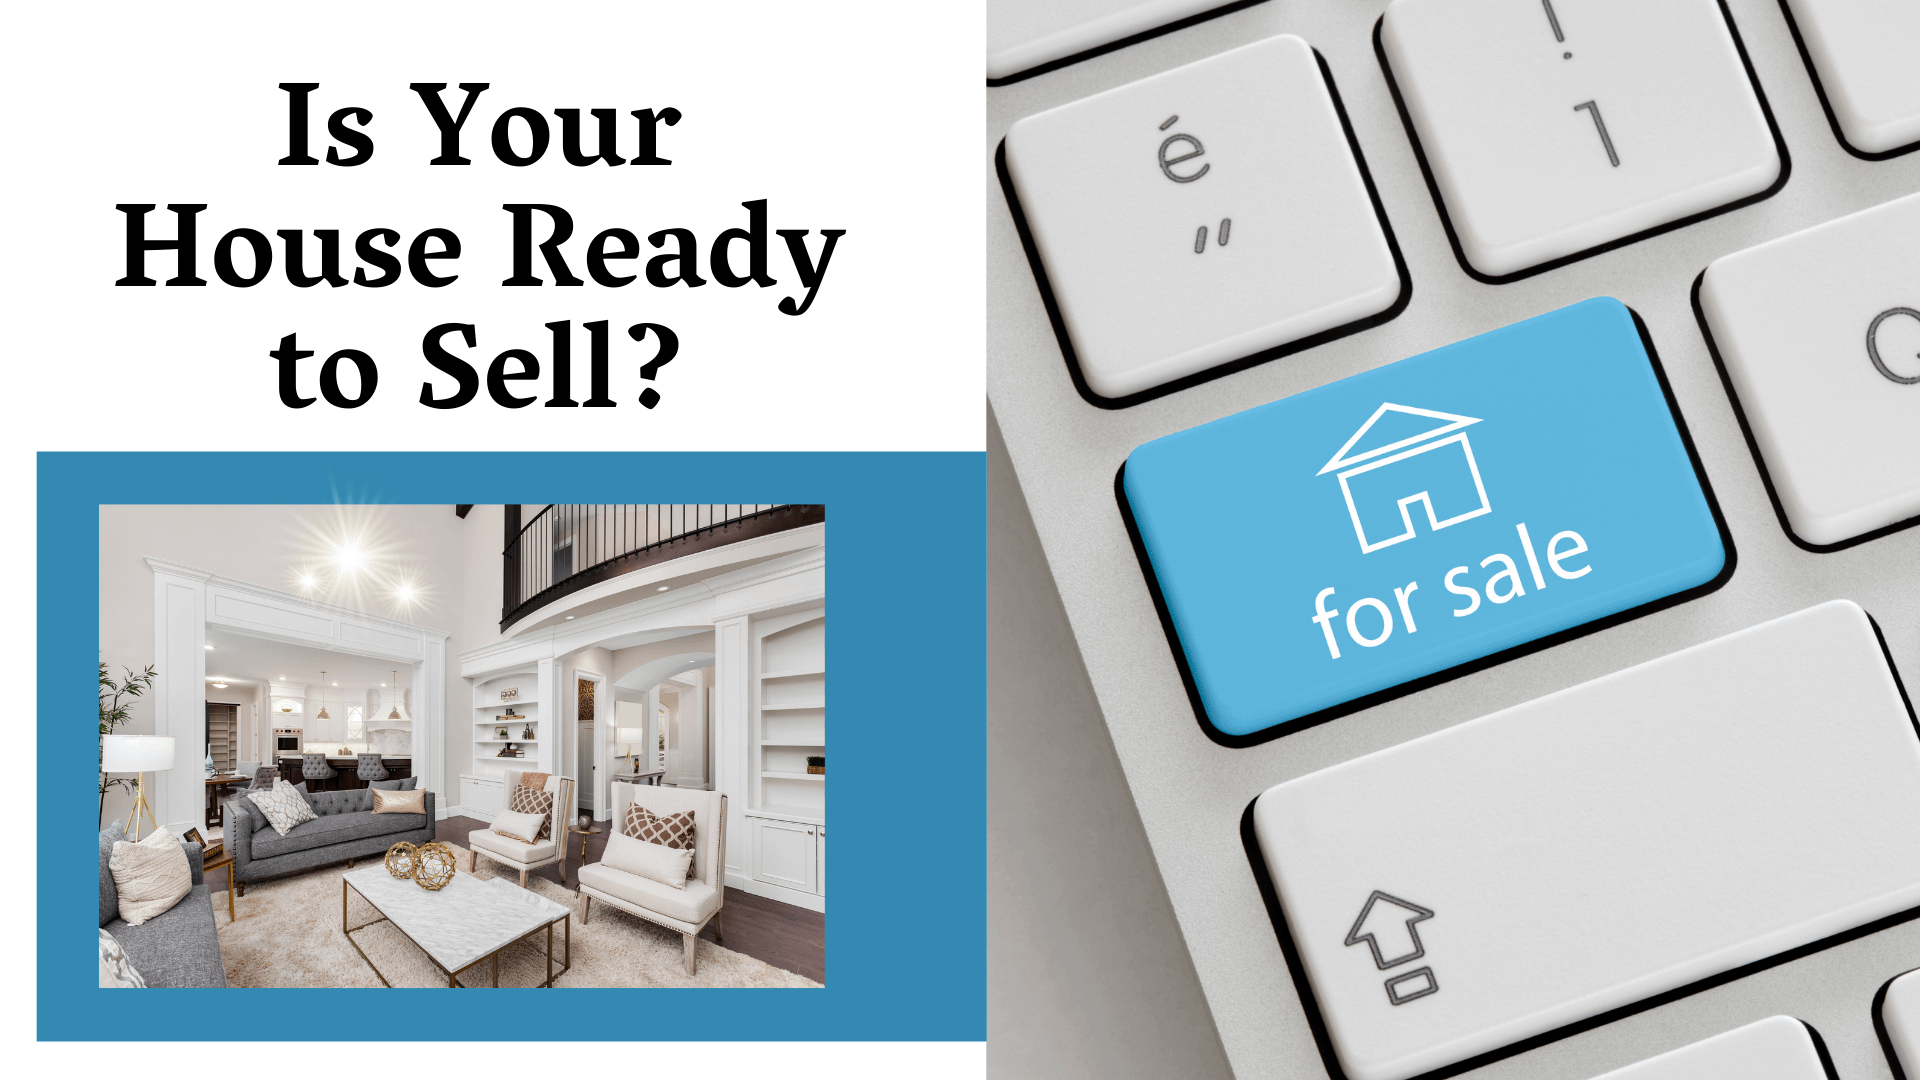 Get Your House Ready to Sell